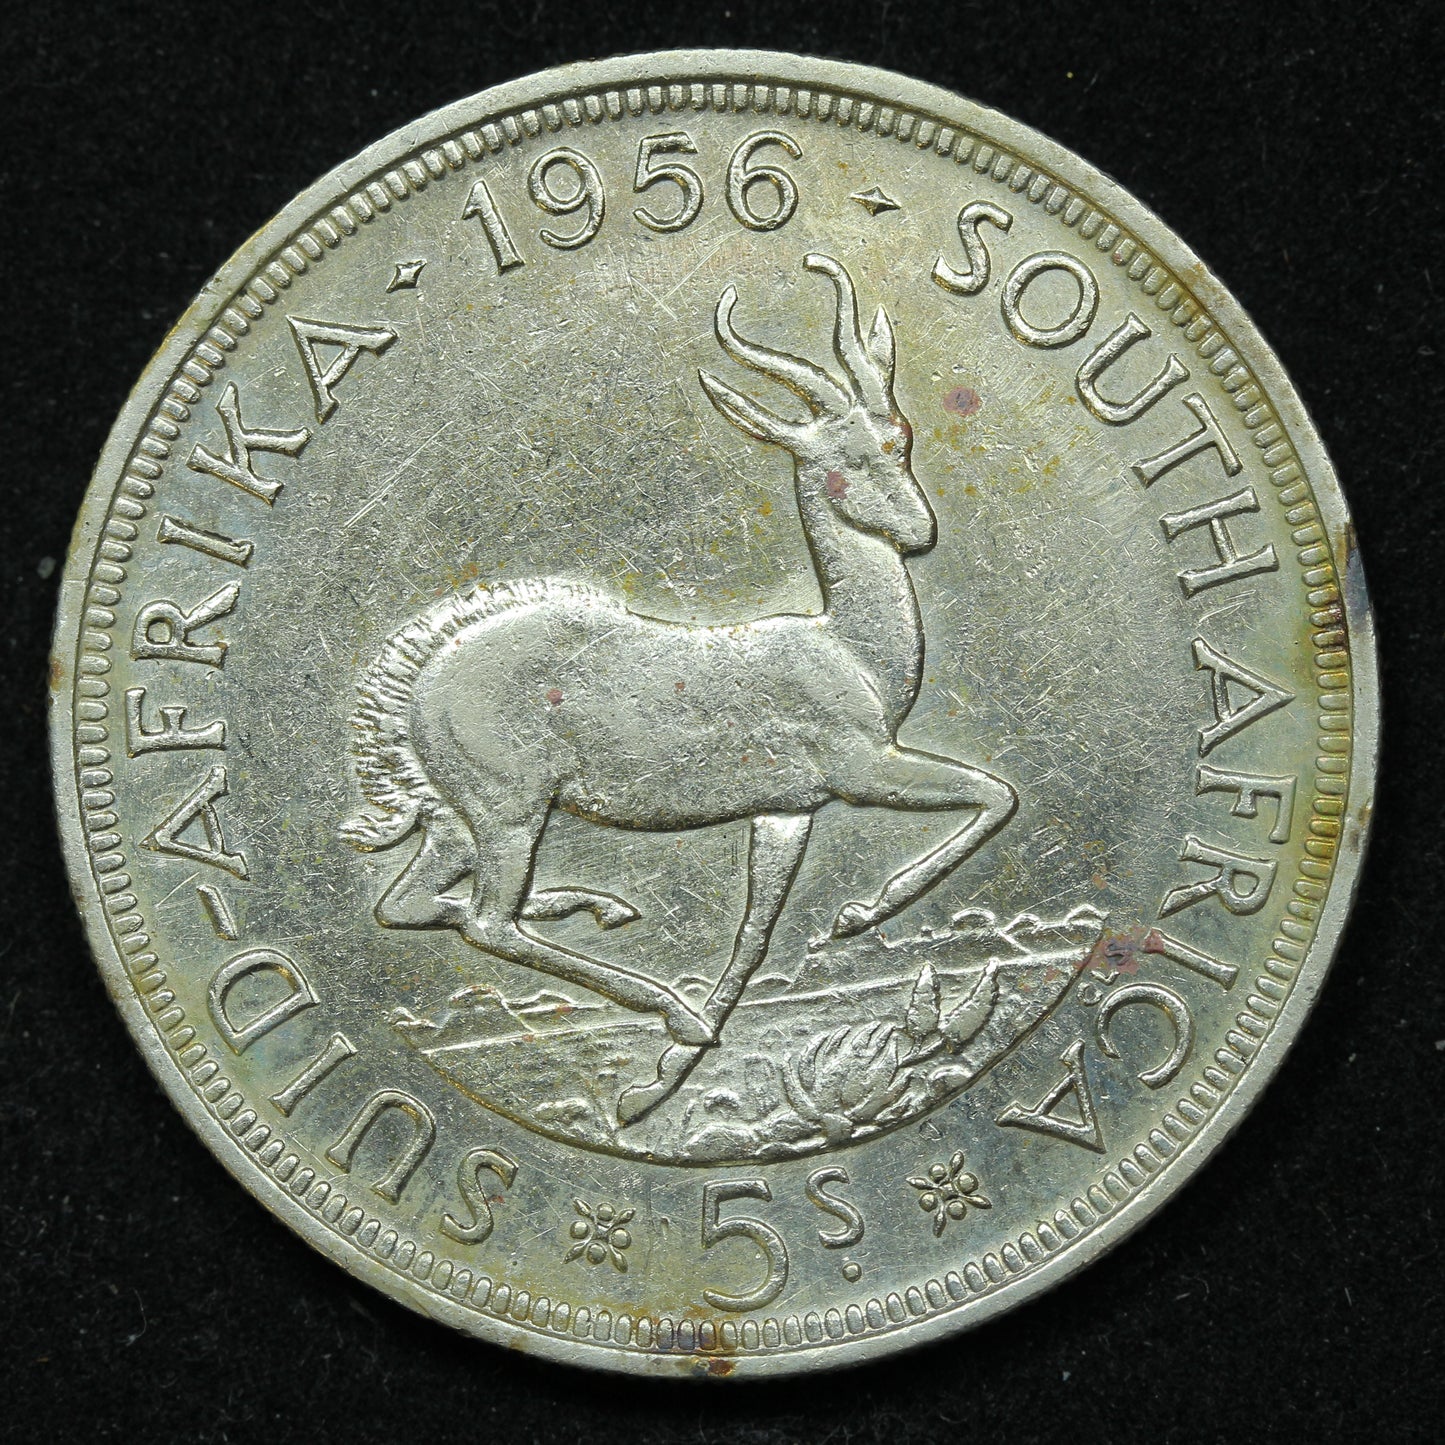 1956 South Africa 5 Five Shilling Silver Coin - KM# 52